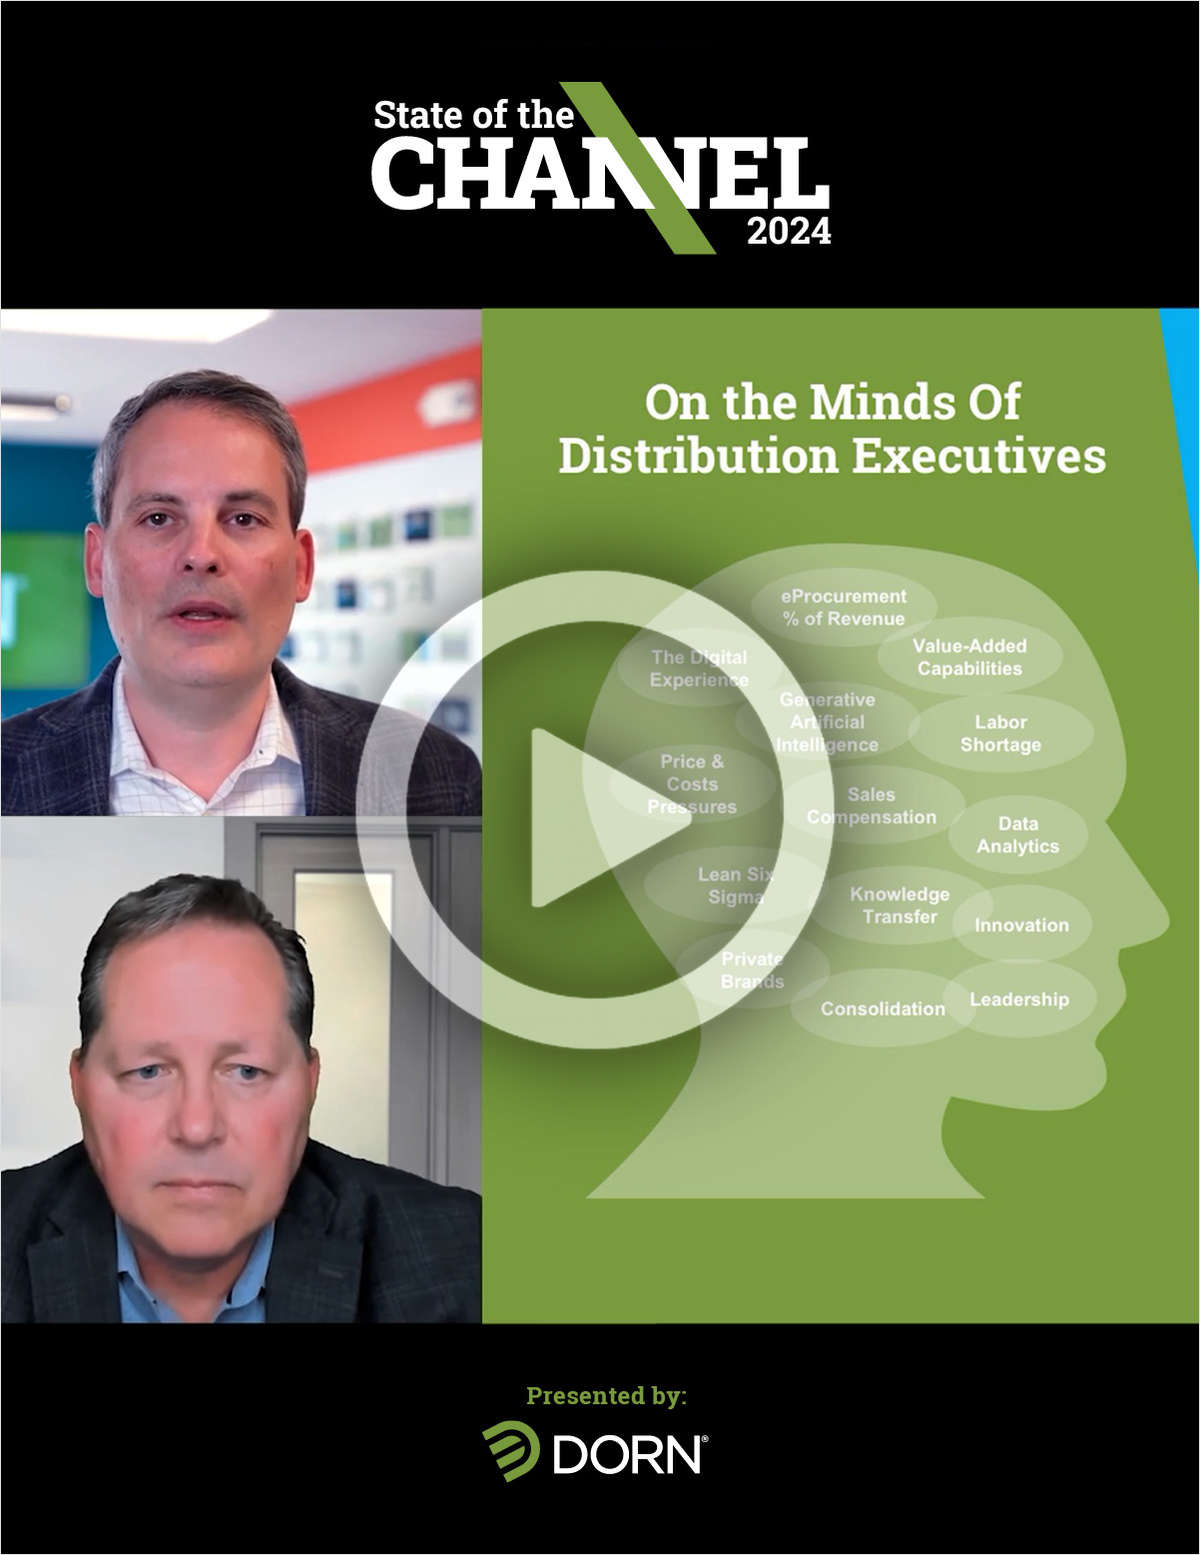 Why do 9 of 10 Sellers in Distribution Feel Their Capabilities Are Undifferentiated?